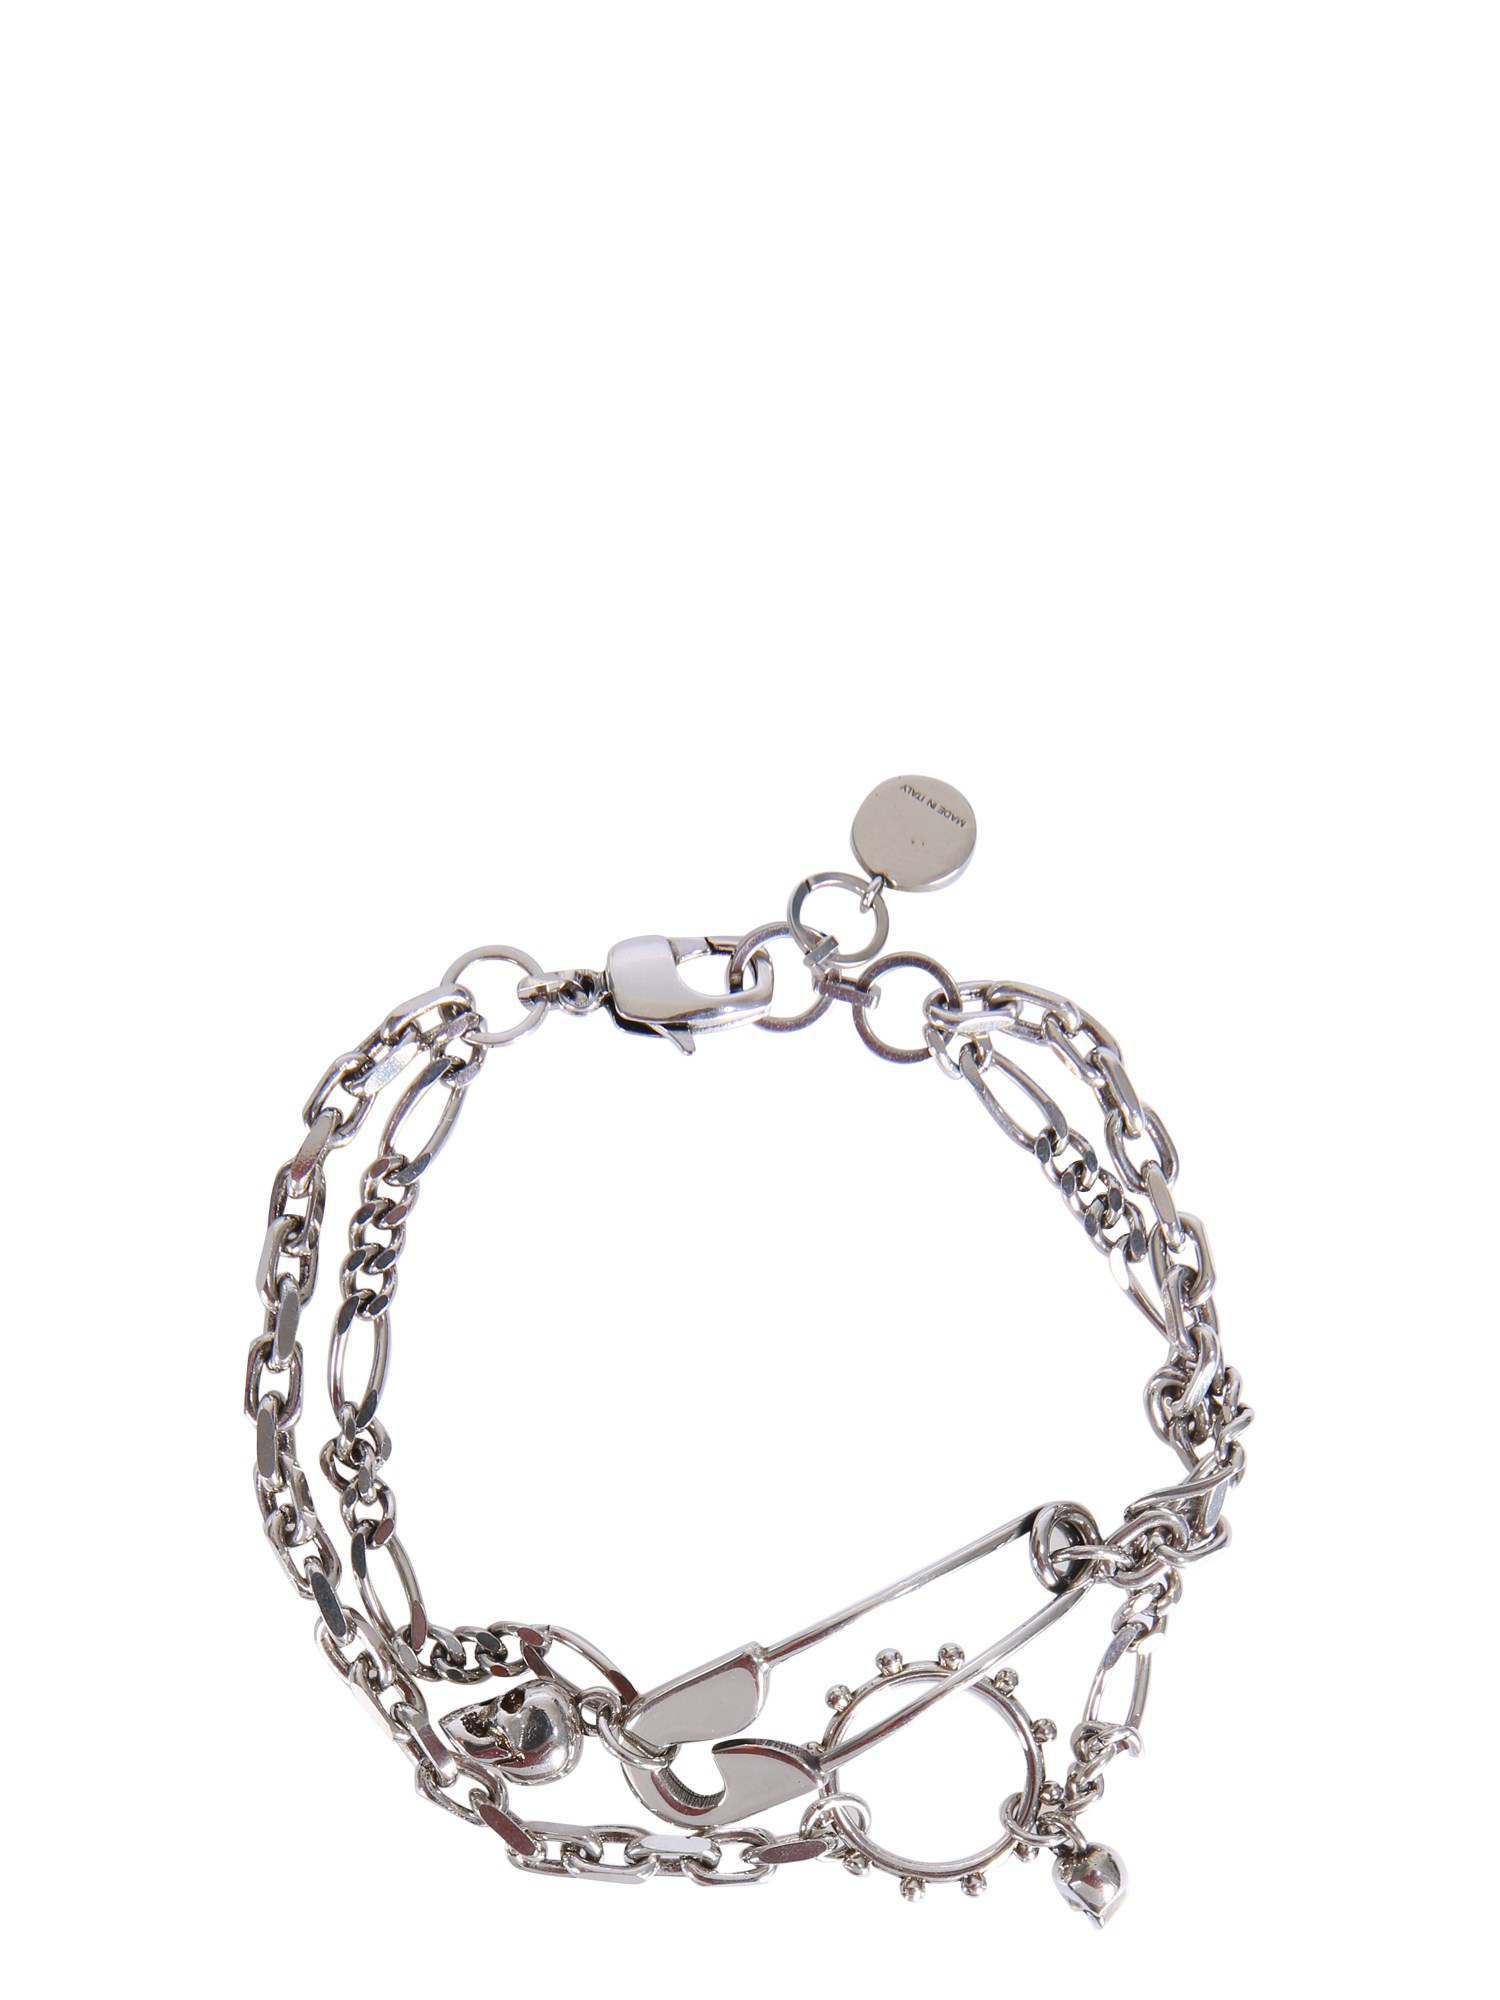 alexander mcqueen bracelet with safety pin